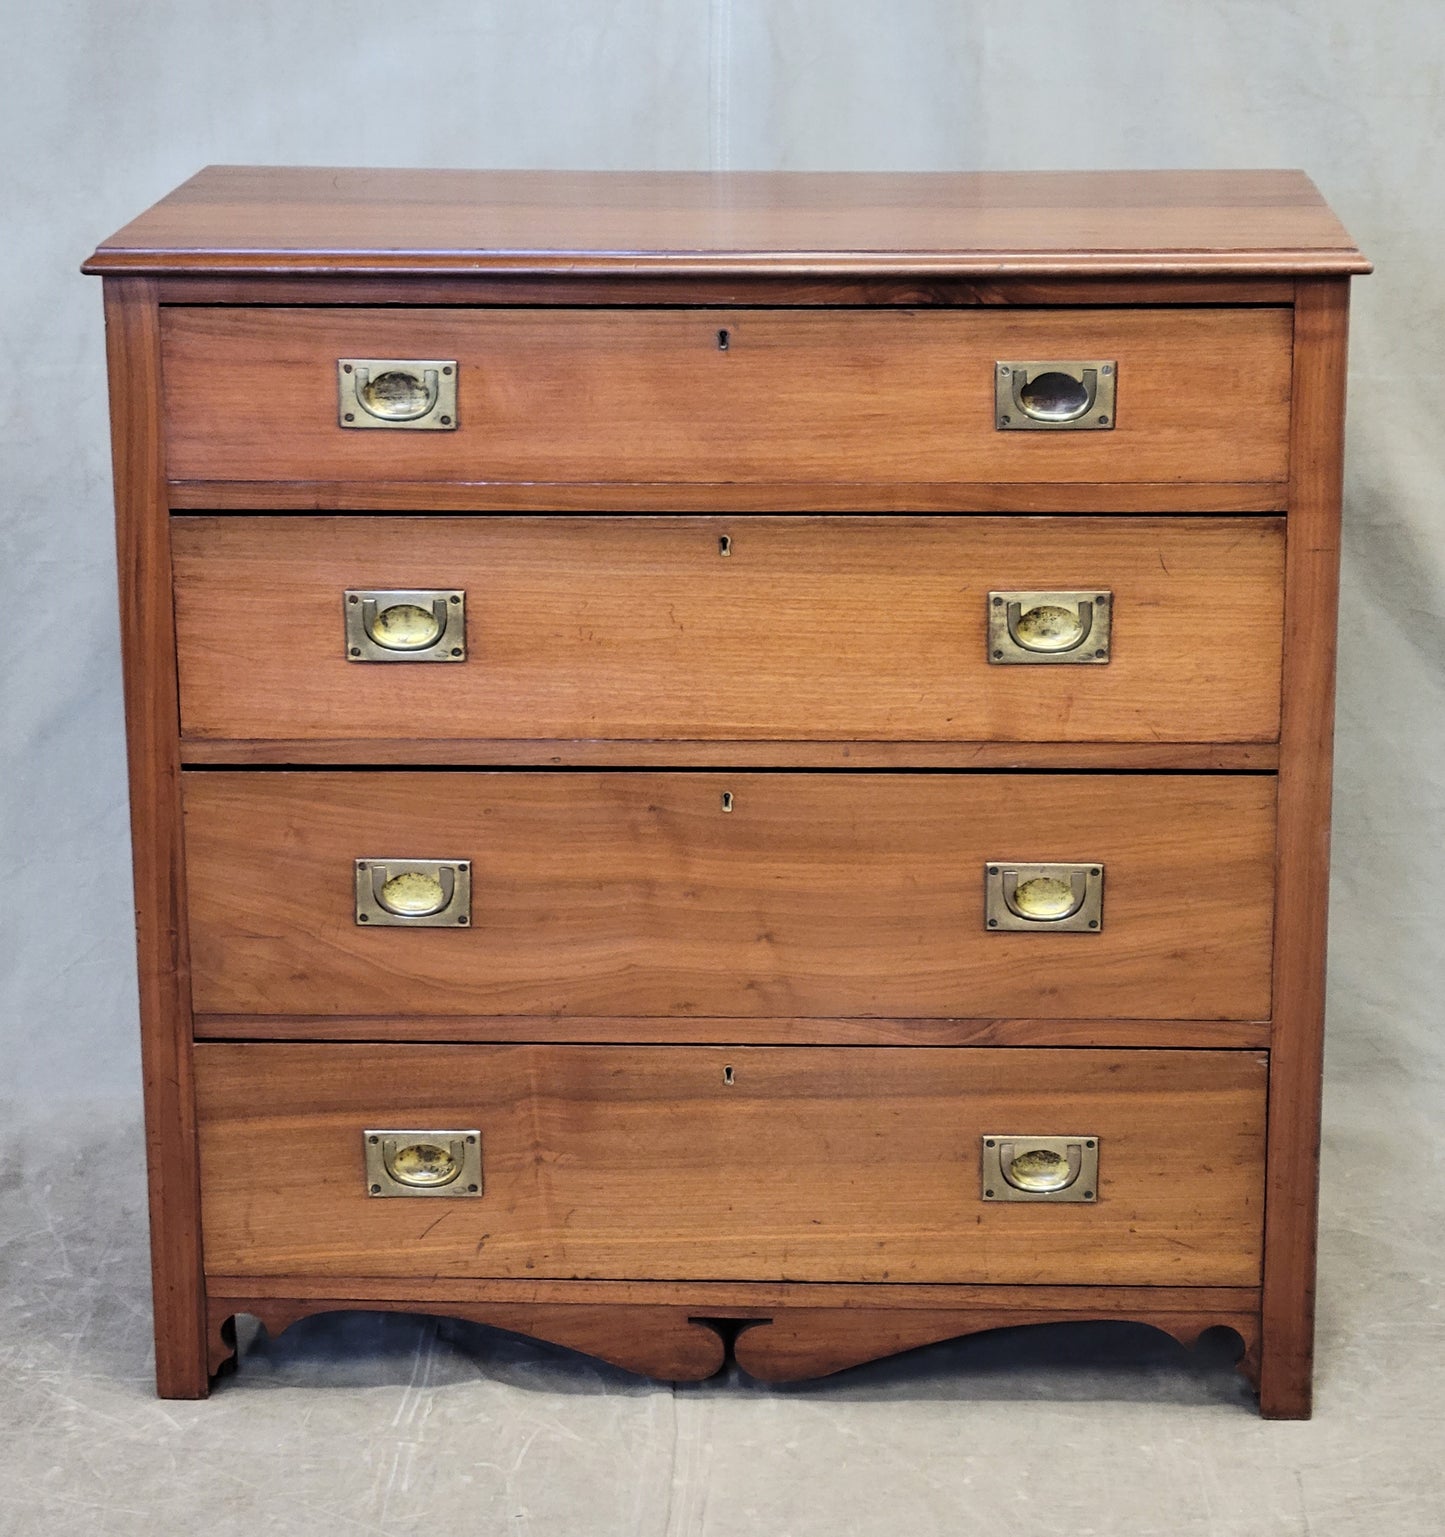 Antique Scottish or English Campaign Butler's Desk Chest of Drawers